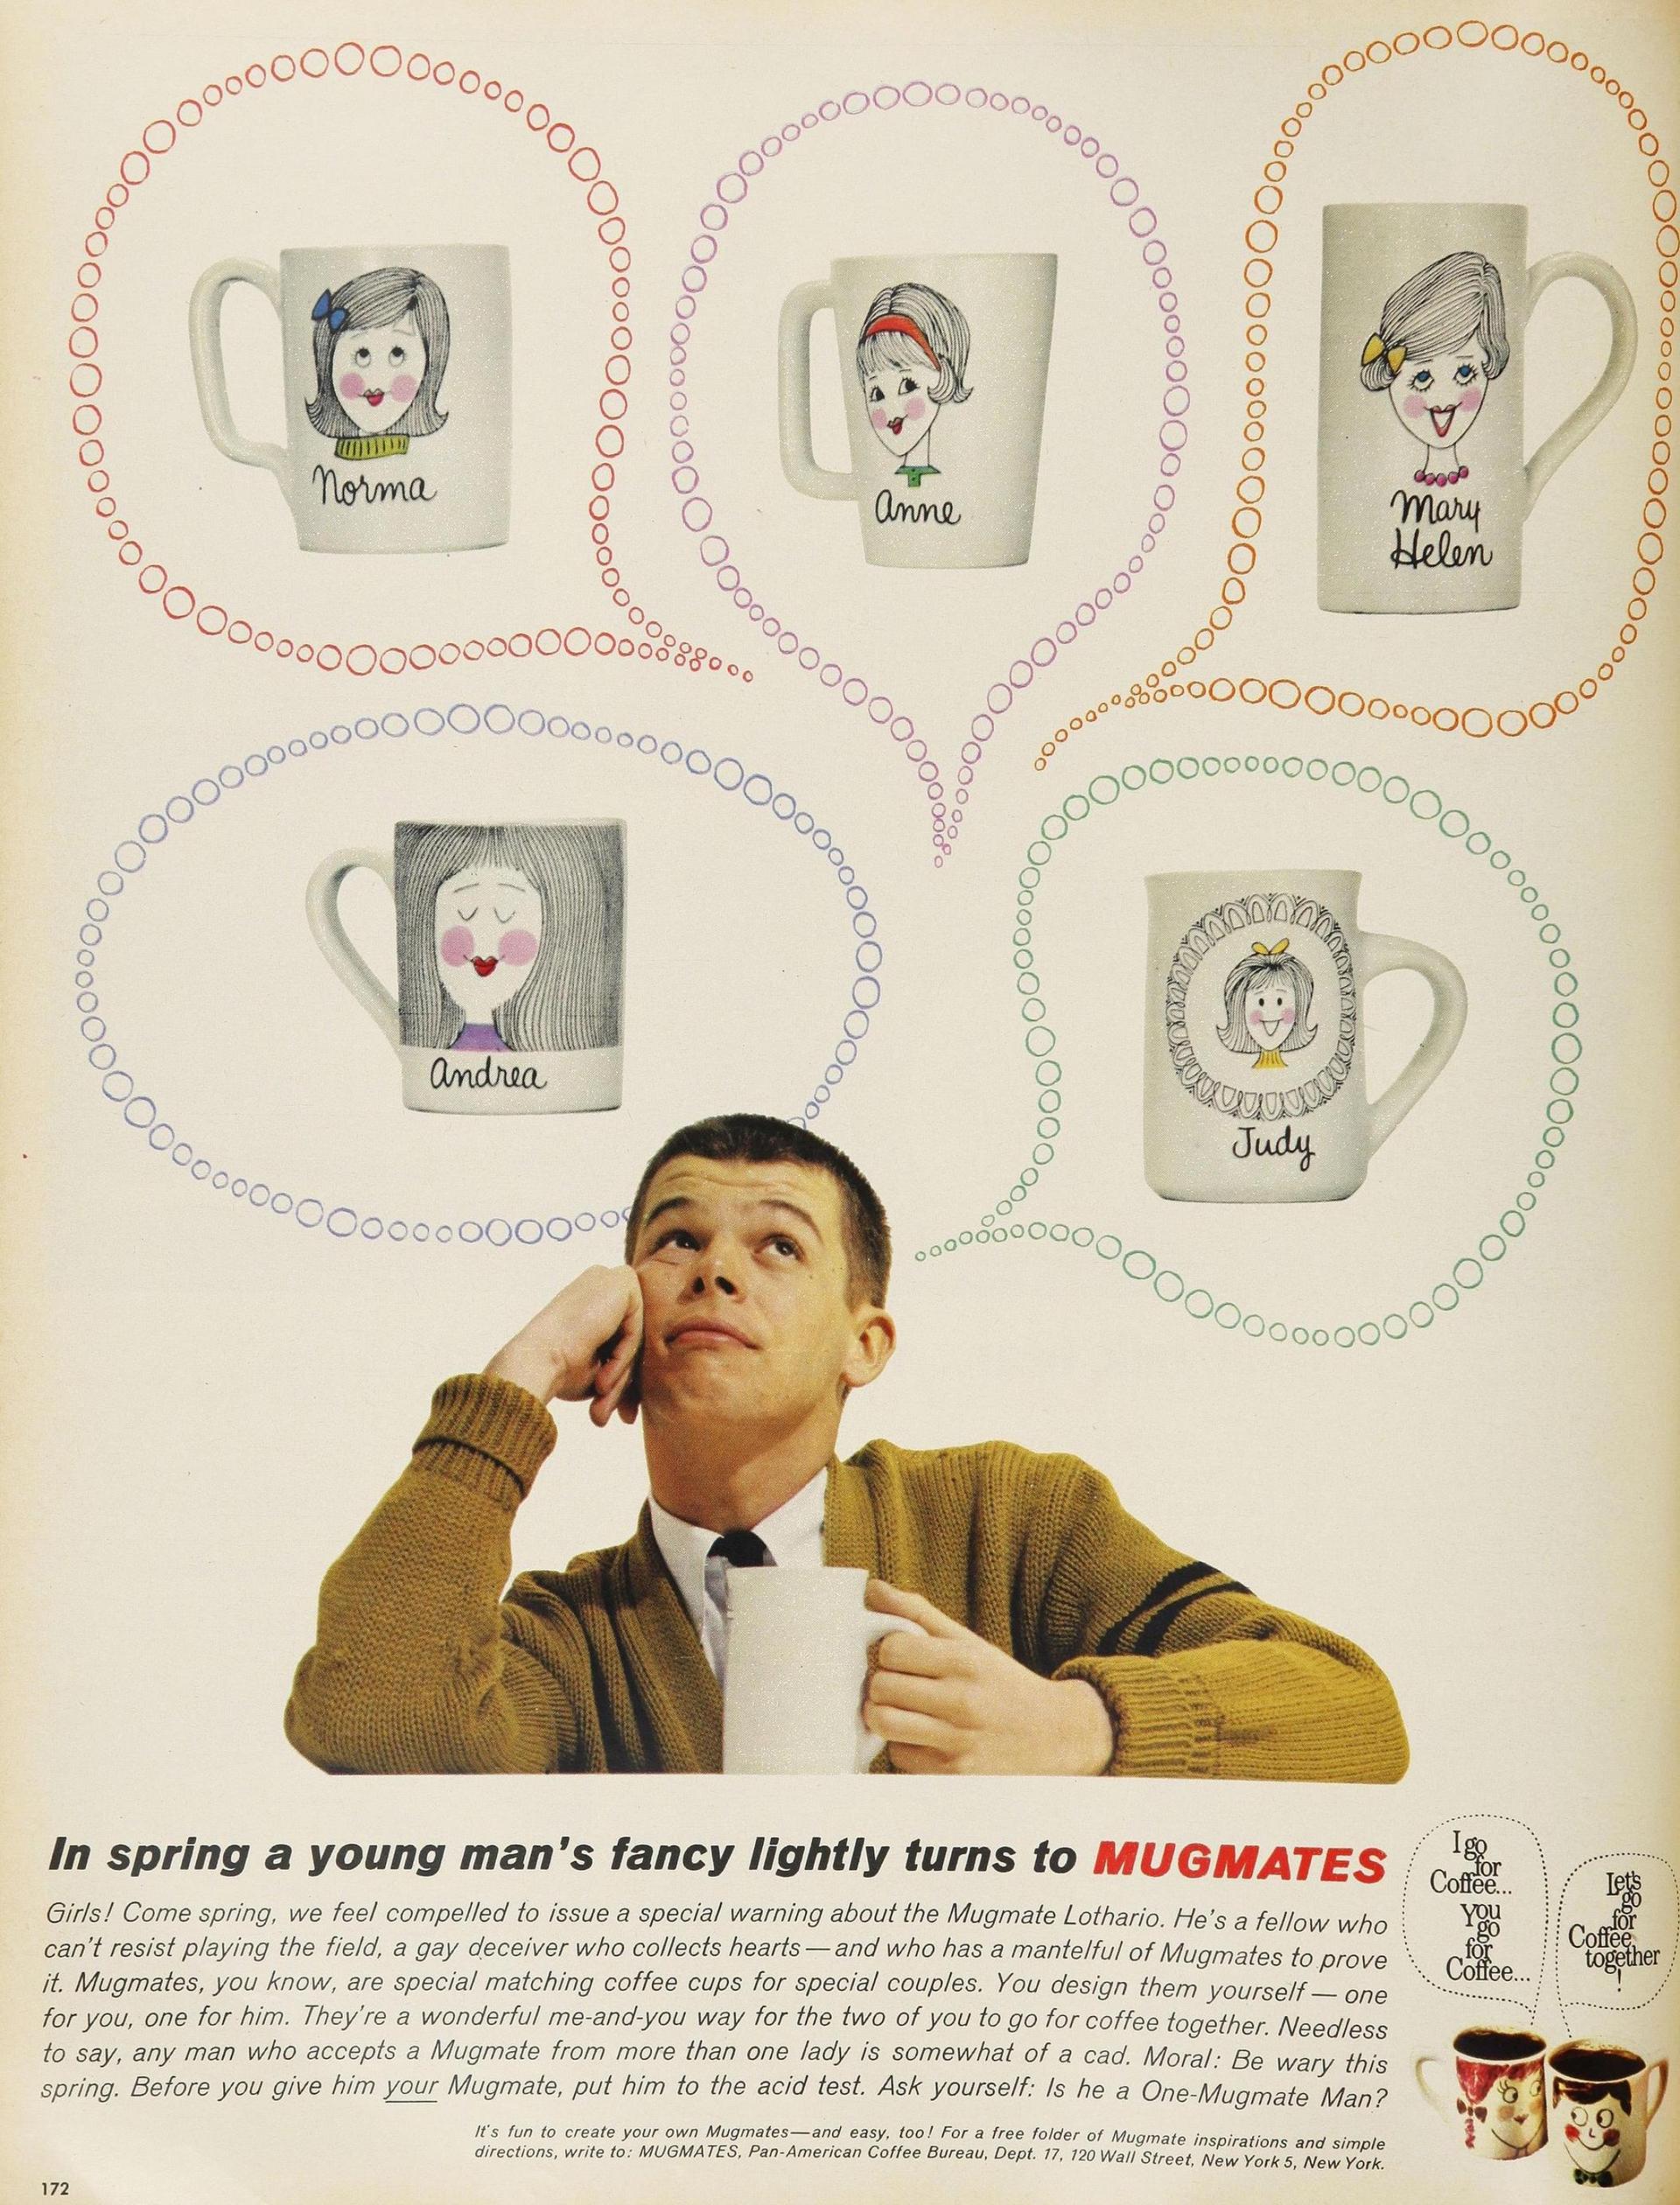 A magazine advertisement for the “Mugmates” campaign from April 1962.